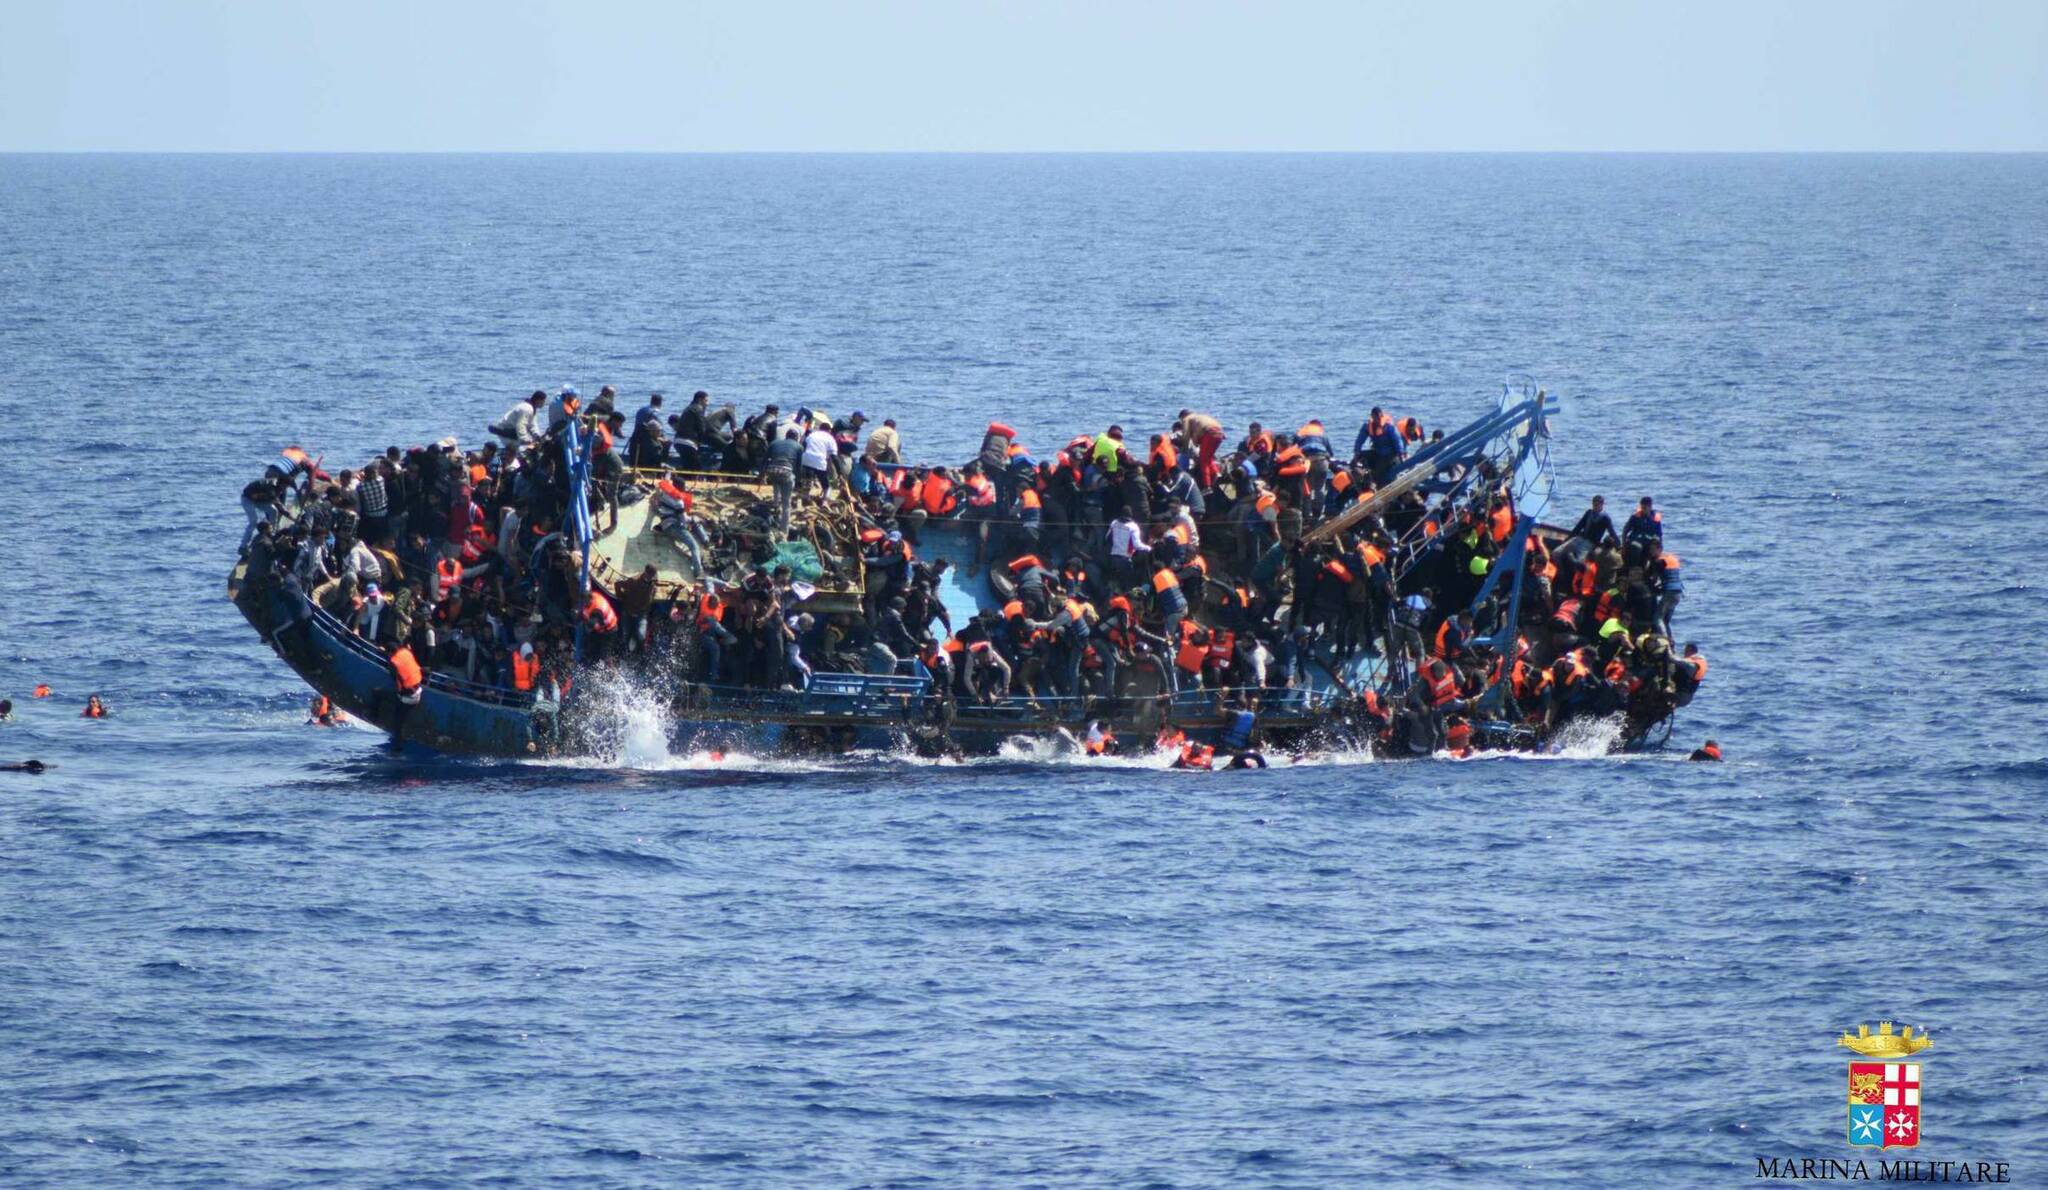 FILE - Tunisia’s coast guard says it has recovered around 210 bodies of migrants under two weeks that have washed up on the North African country’s central coastline amid an ongoing increase in <a href="https://apnews.com/hub/migration">migration</a>. People jump out of a boat right before it overturns off the Libyan coast May 25, 2016. (Marina Militare via AP Photo)